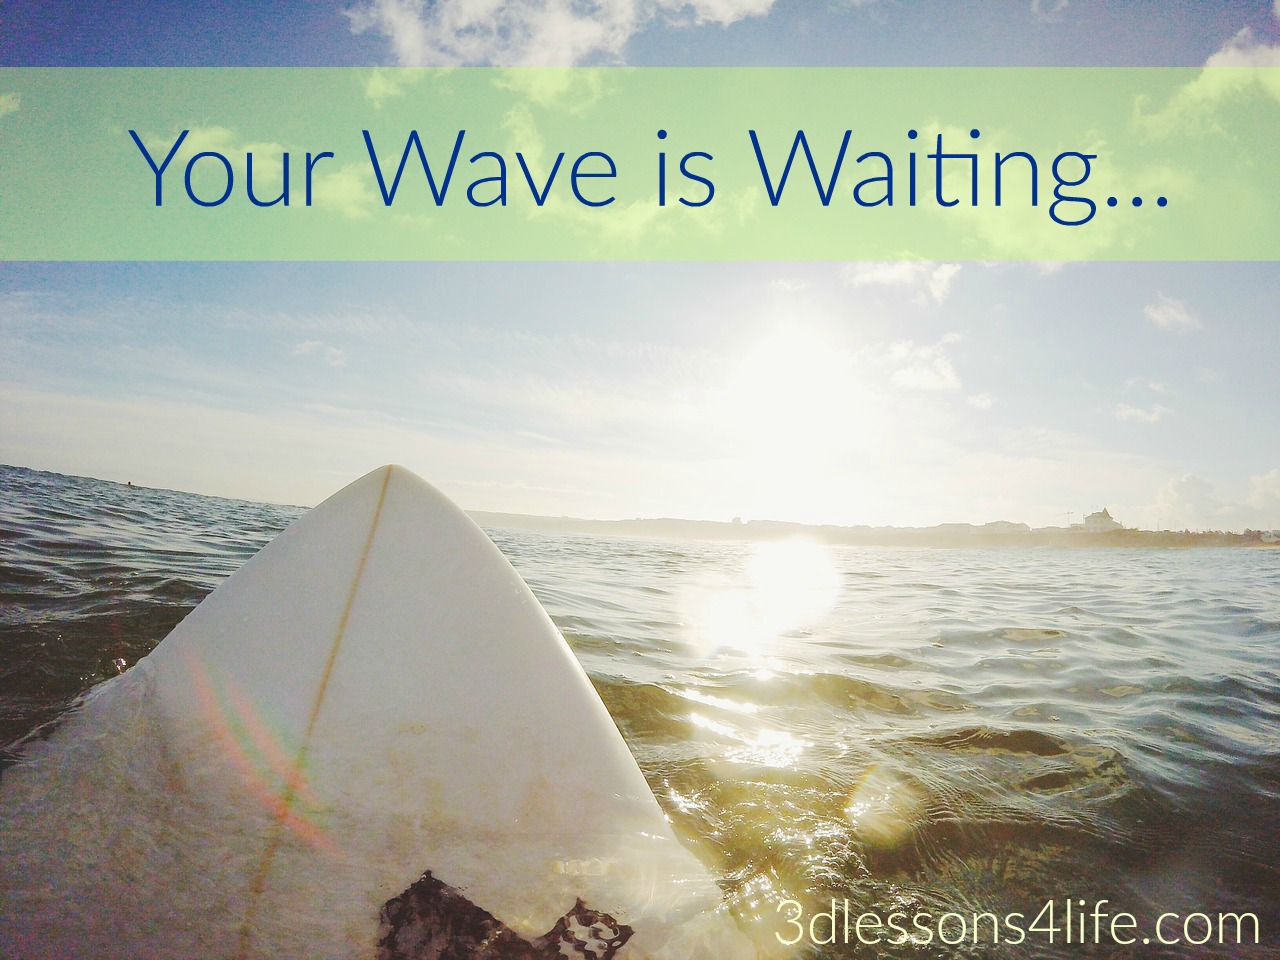 Your Wave is Waiting | 3dlessons4life.com